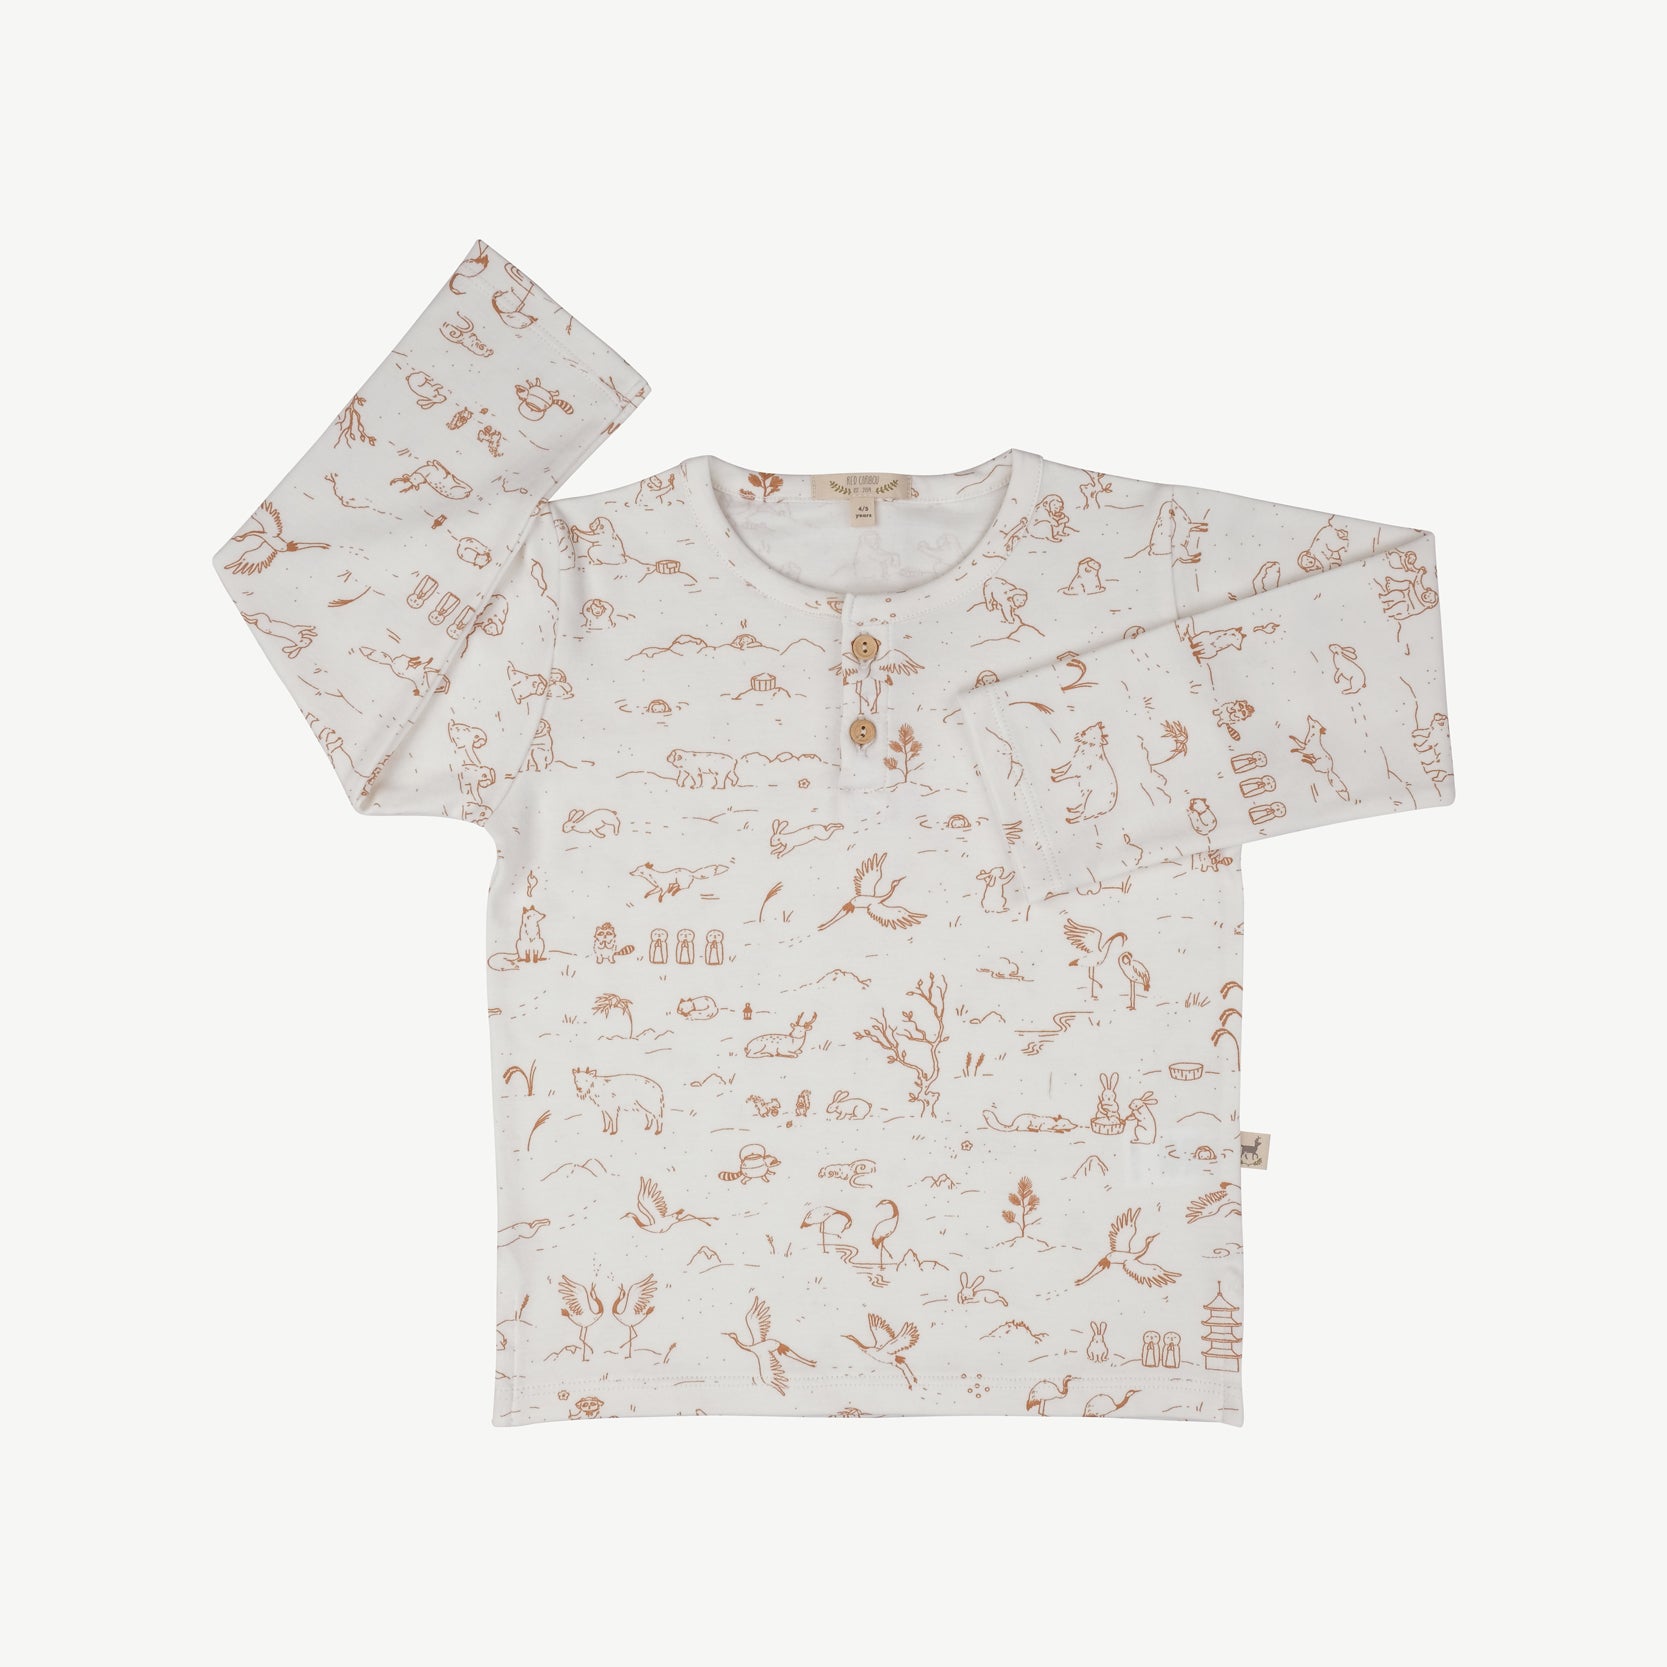 'the story' ivory buttons t-shirt